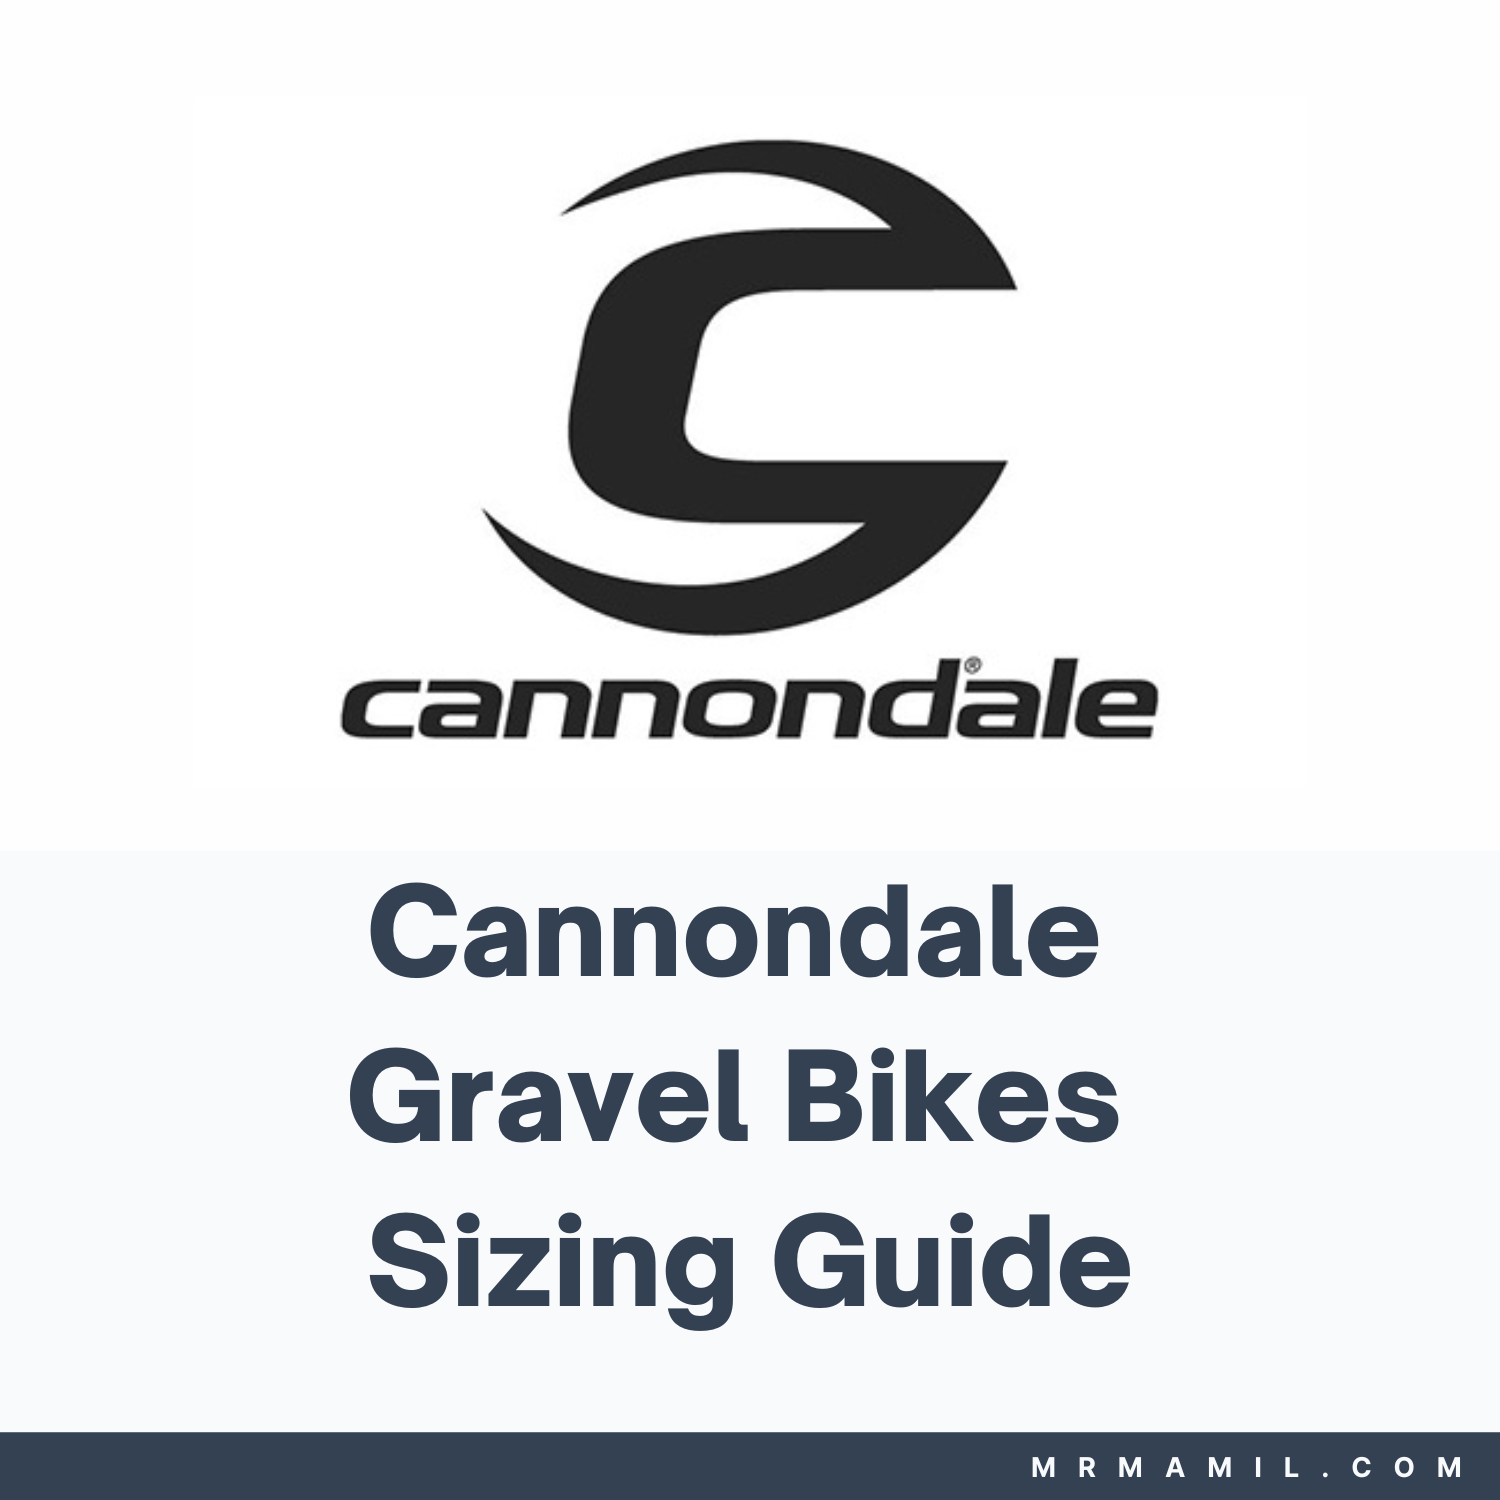 Cannondale Gravel Bikes Sizing Guide